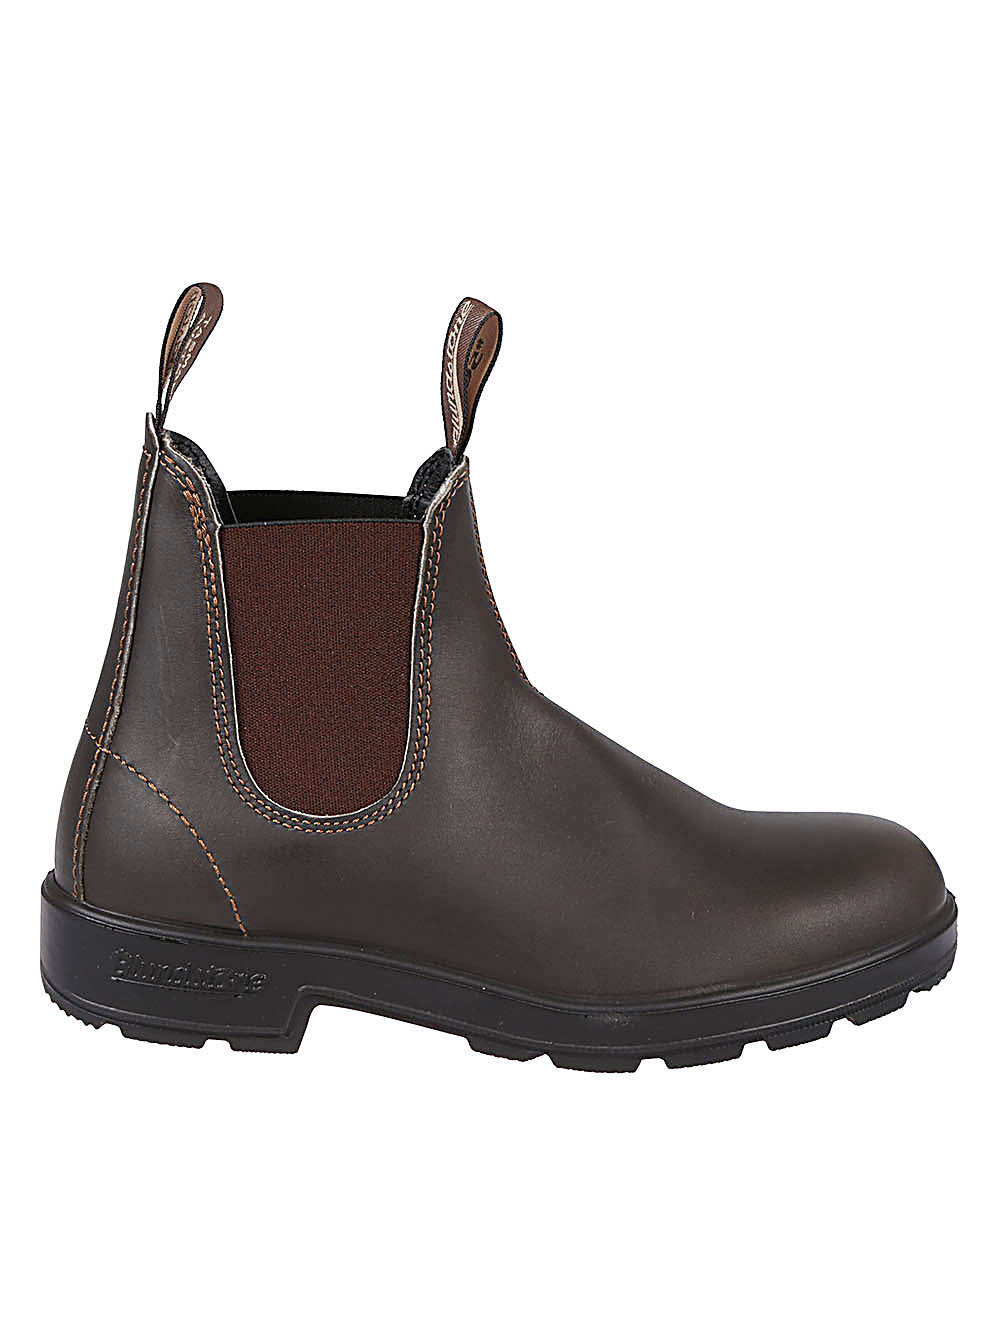 Blundstone BLUNDSTONE- 500 Leather Chelsea Boots